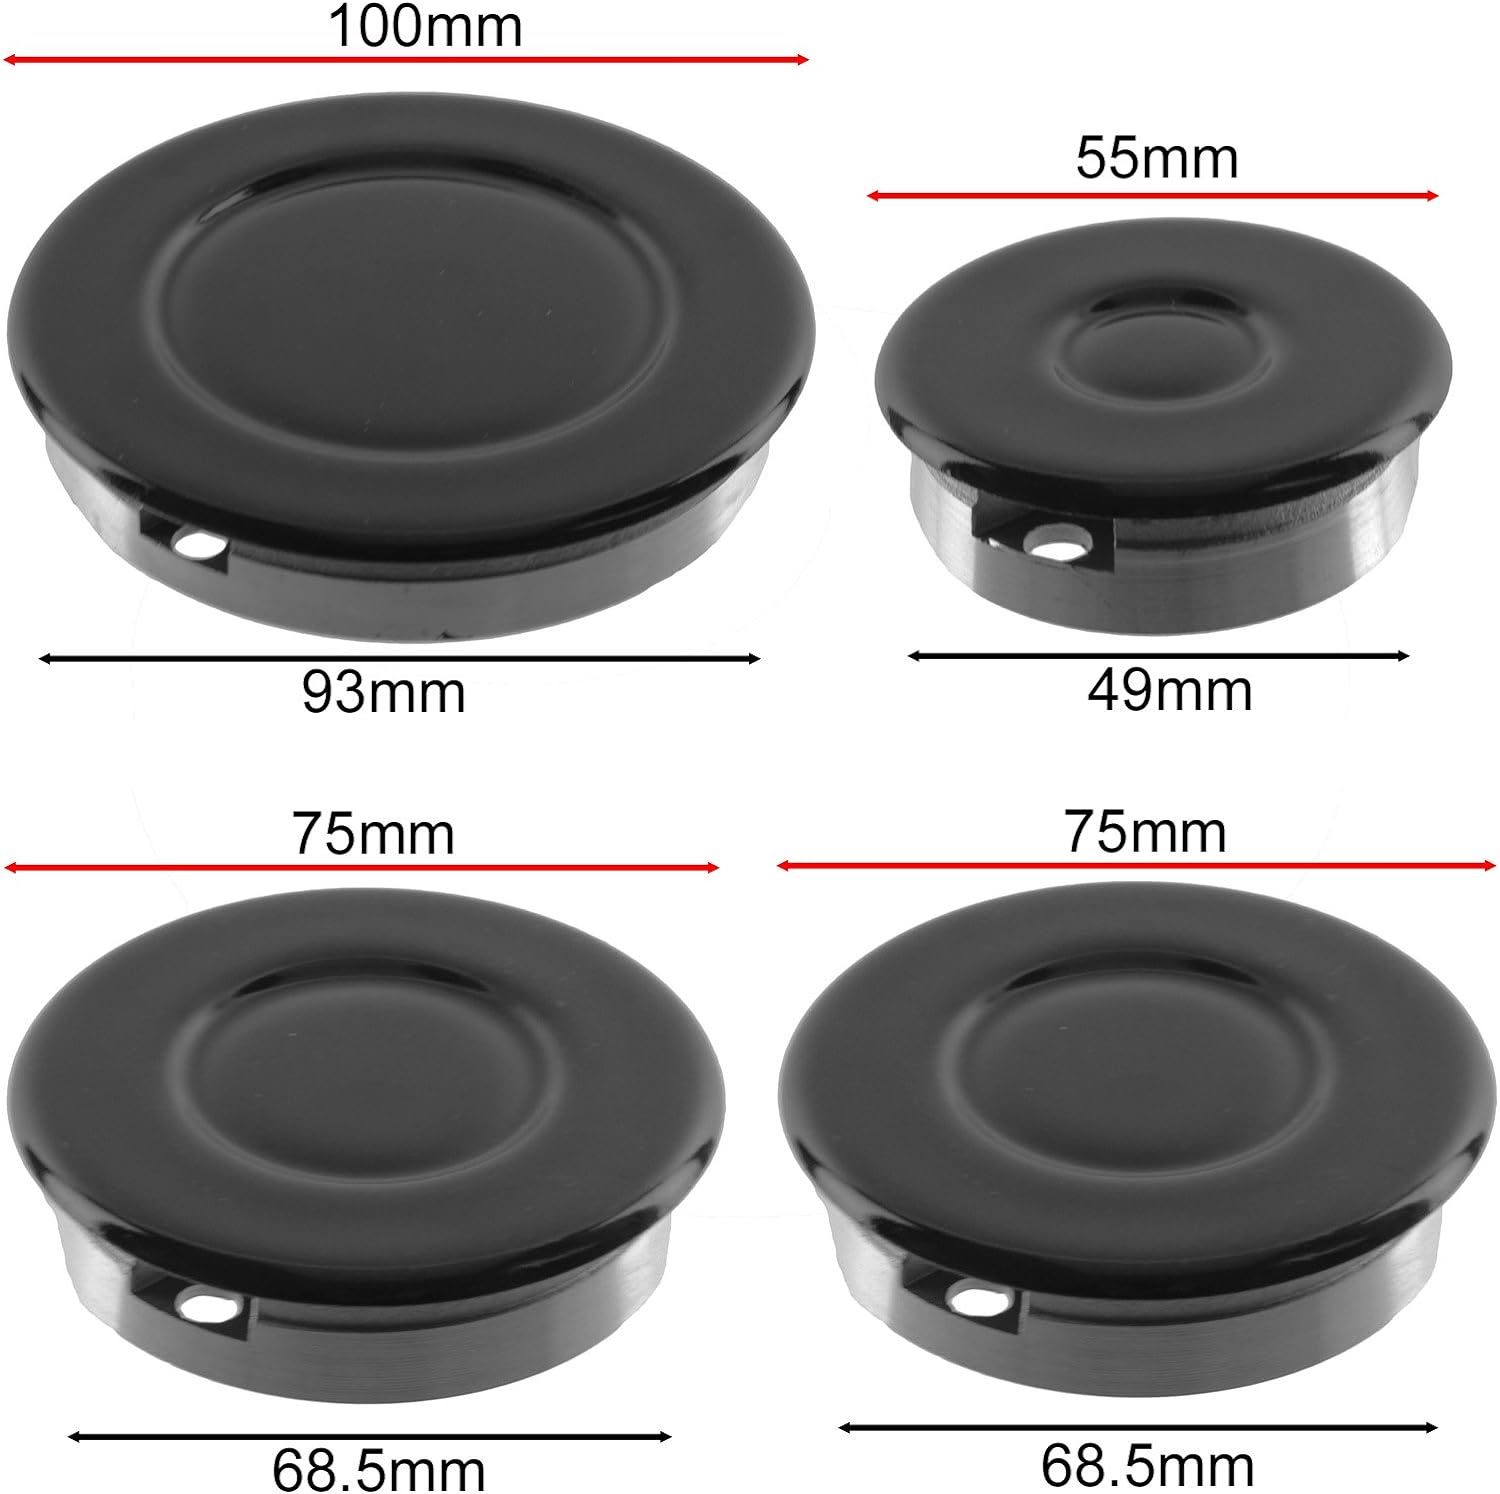 SPARES2GO (Non Universal) Oven Cooker Hob Gas Burner Crown & Flame Cap Kit for Lamona (Small, 2 Medium & Large, 55mm - 100mm) - Amazing Gadgets Outlet